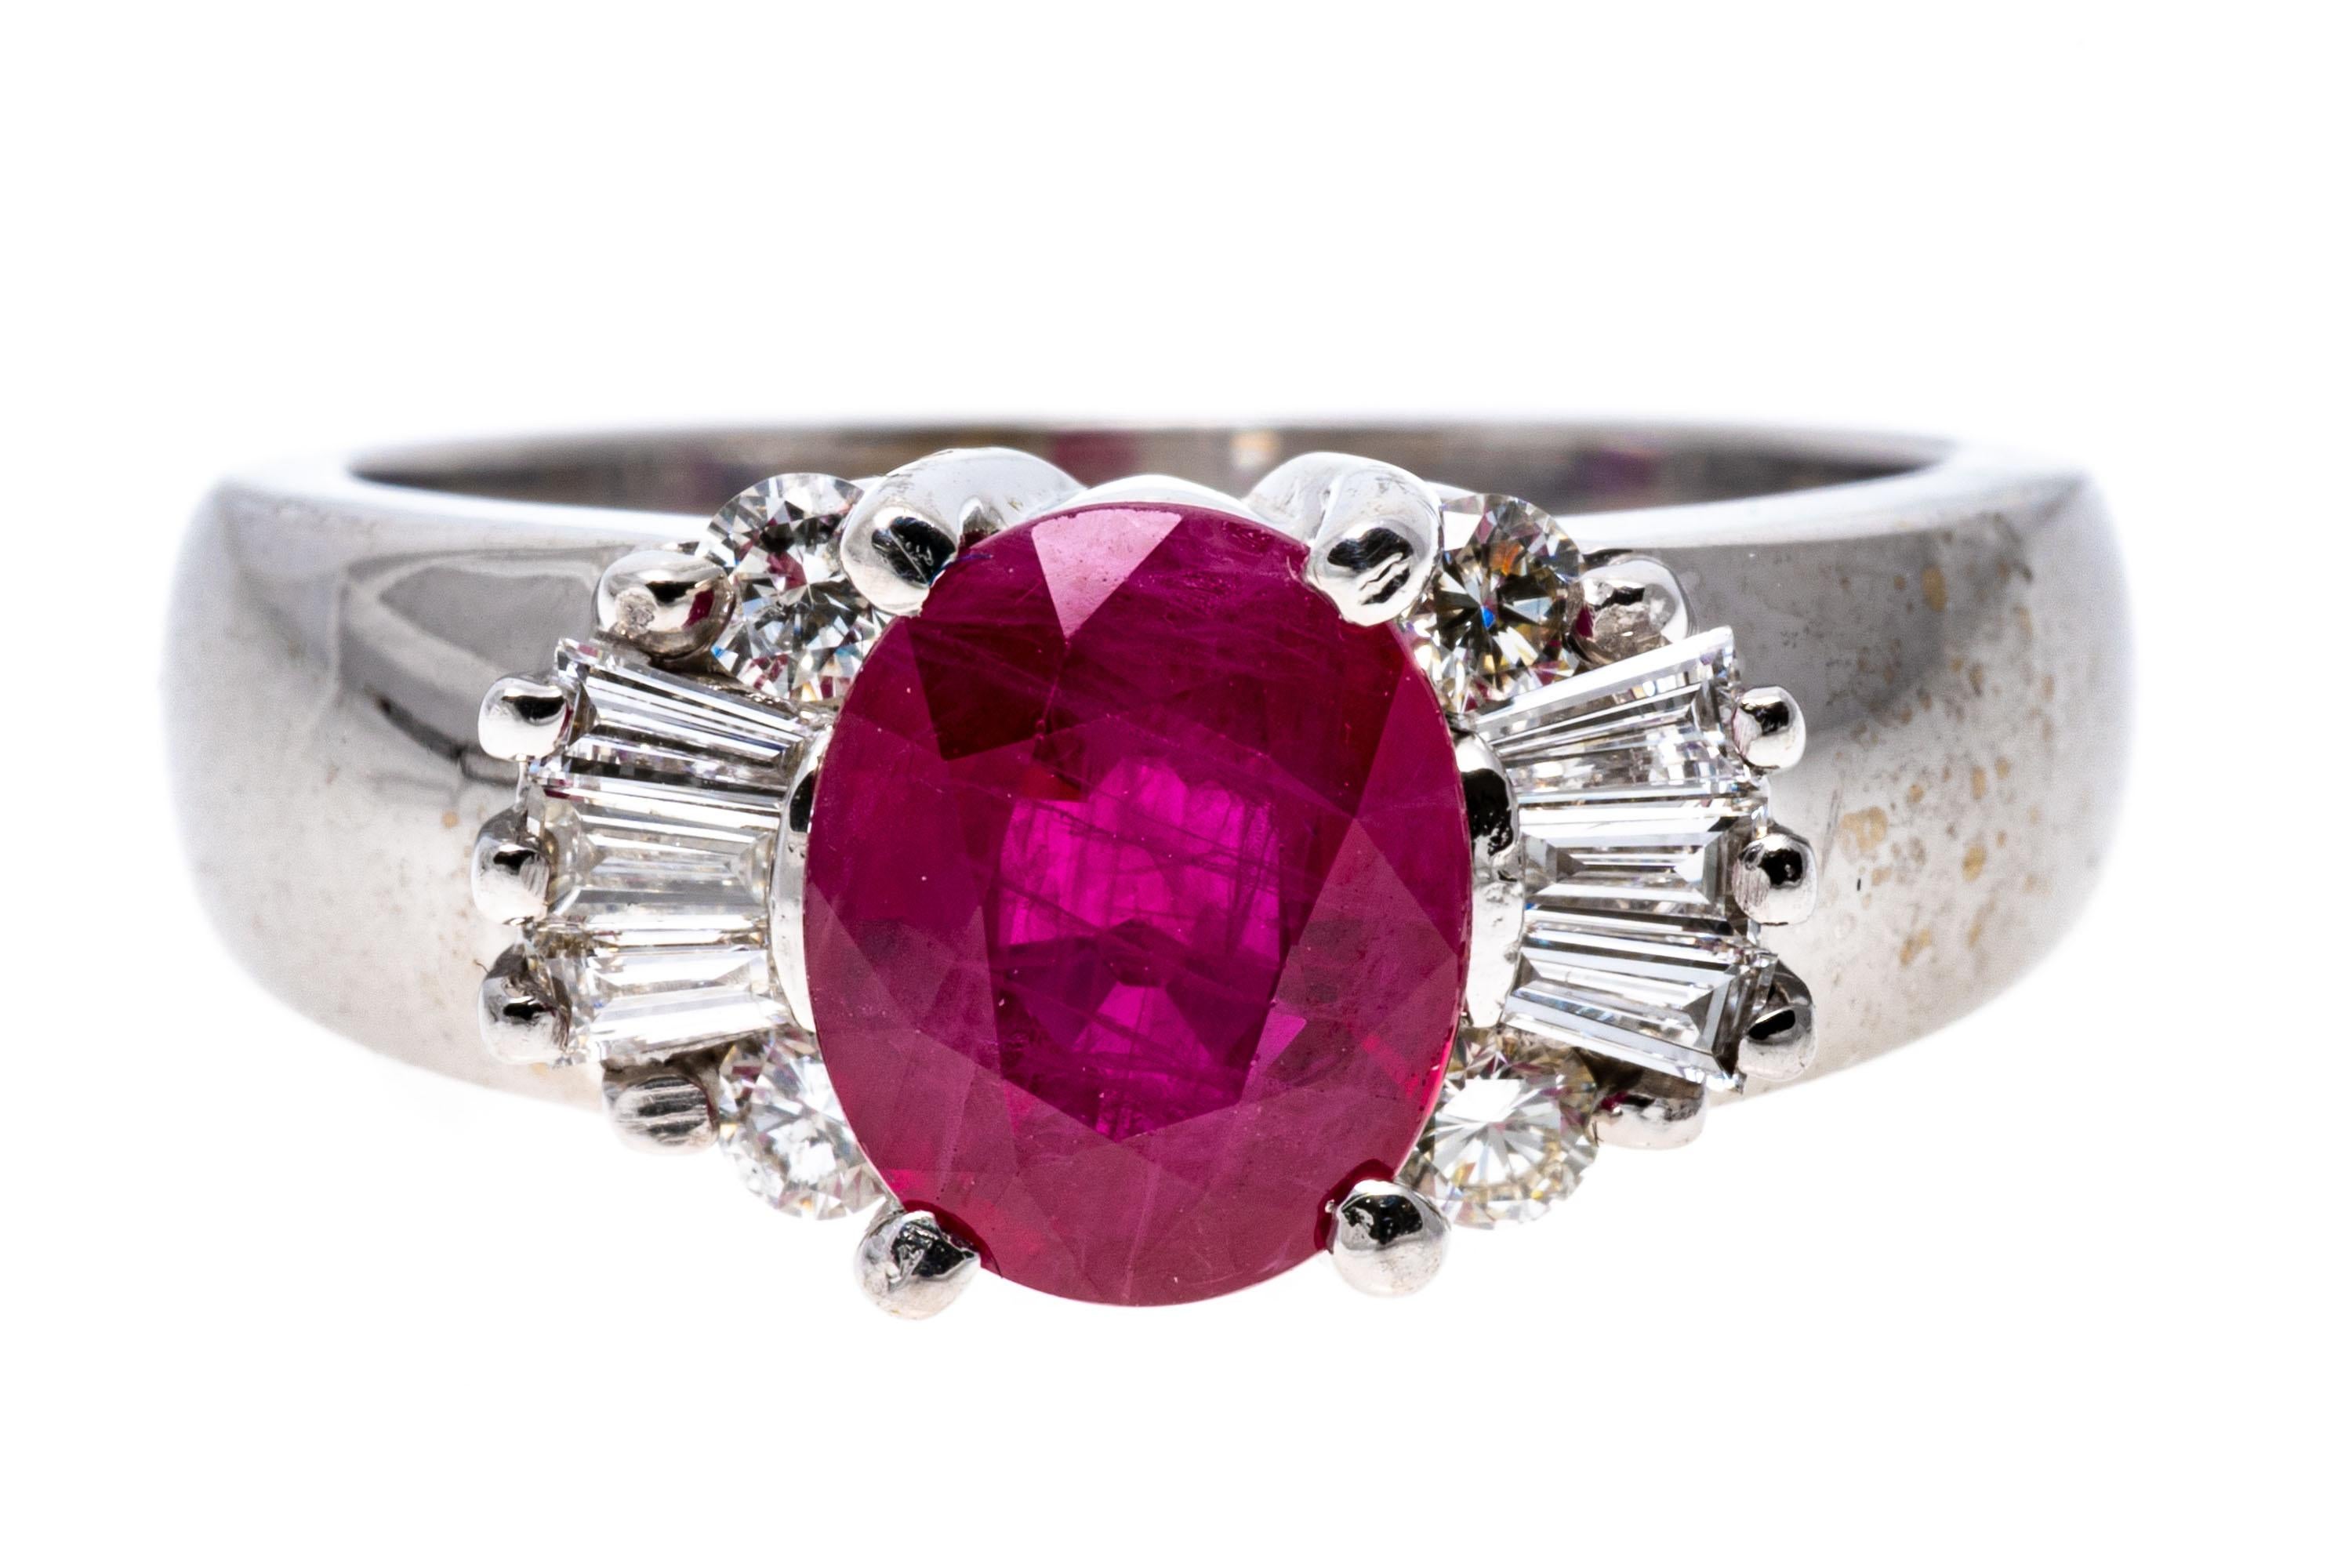 This beautiful white gold ring has a center oval faceted, pinkish red color ruby, approximately 1.83 CTS, prong set. The ruby is flanked by shoulders set with a fan of tapered baguette cut diamonds, approximately 0.12 TCW, which is capped above and